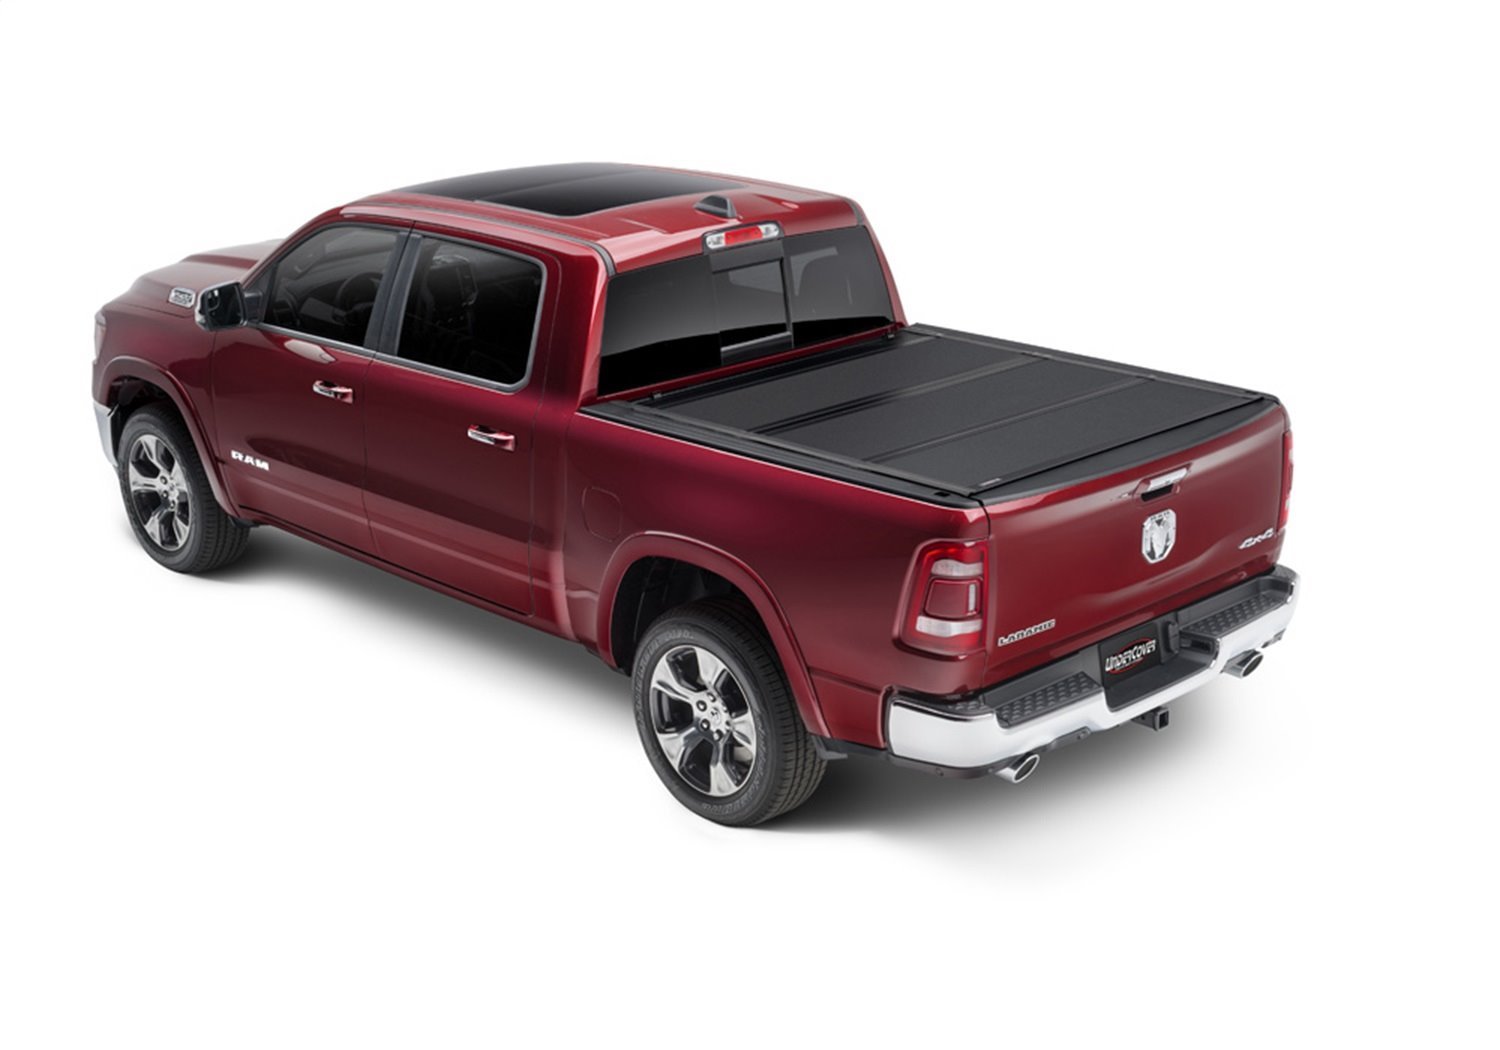 AX32008 Armor Flex Hard Folding Cover, Fits Select Ram 5'7" Bed Crew w/o RamBox w/o Multifunction Tailgate, Black Textured